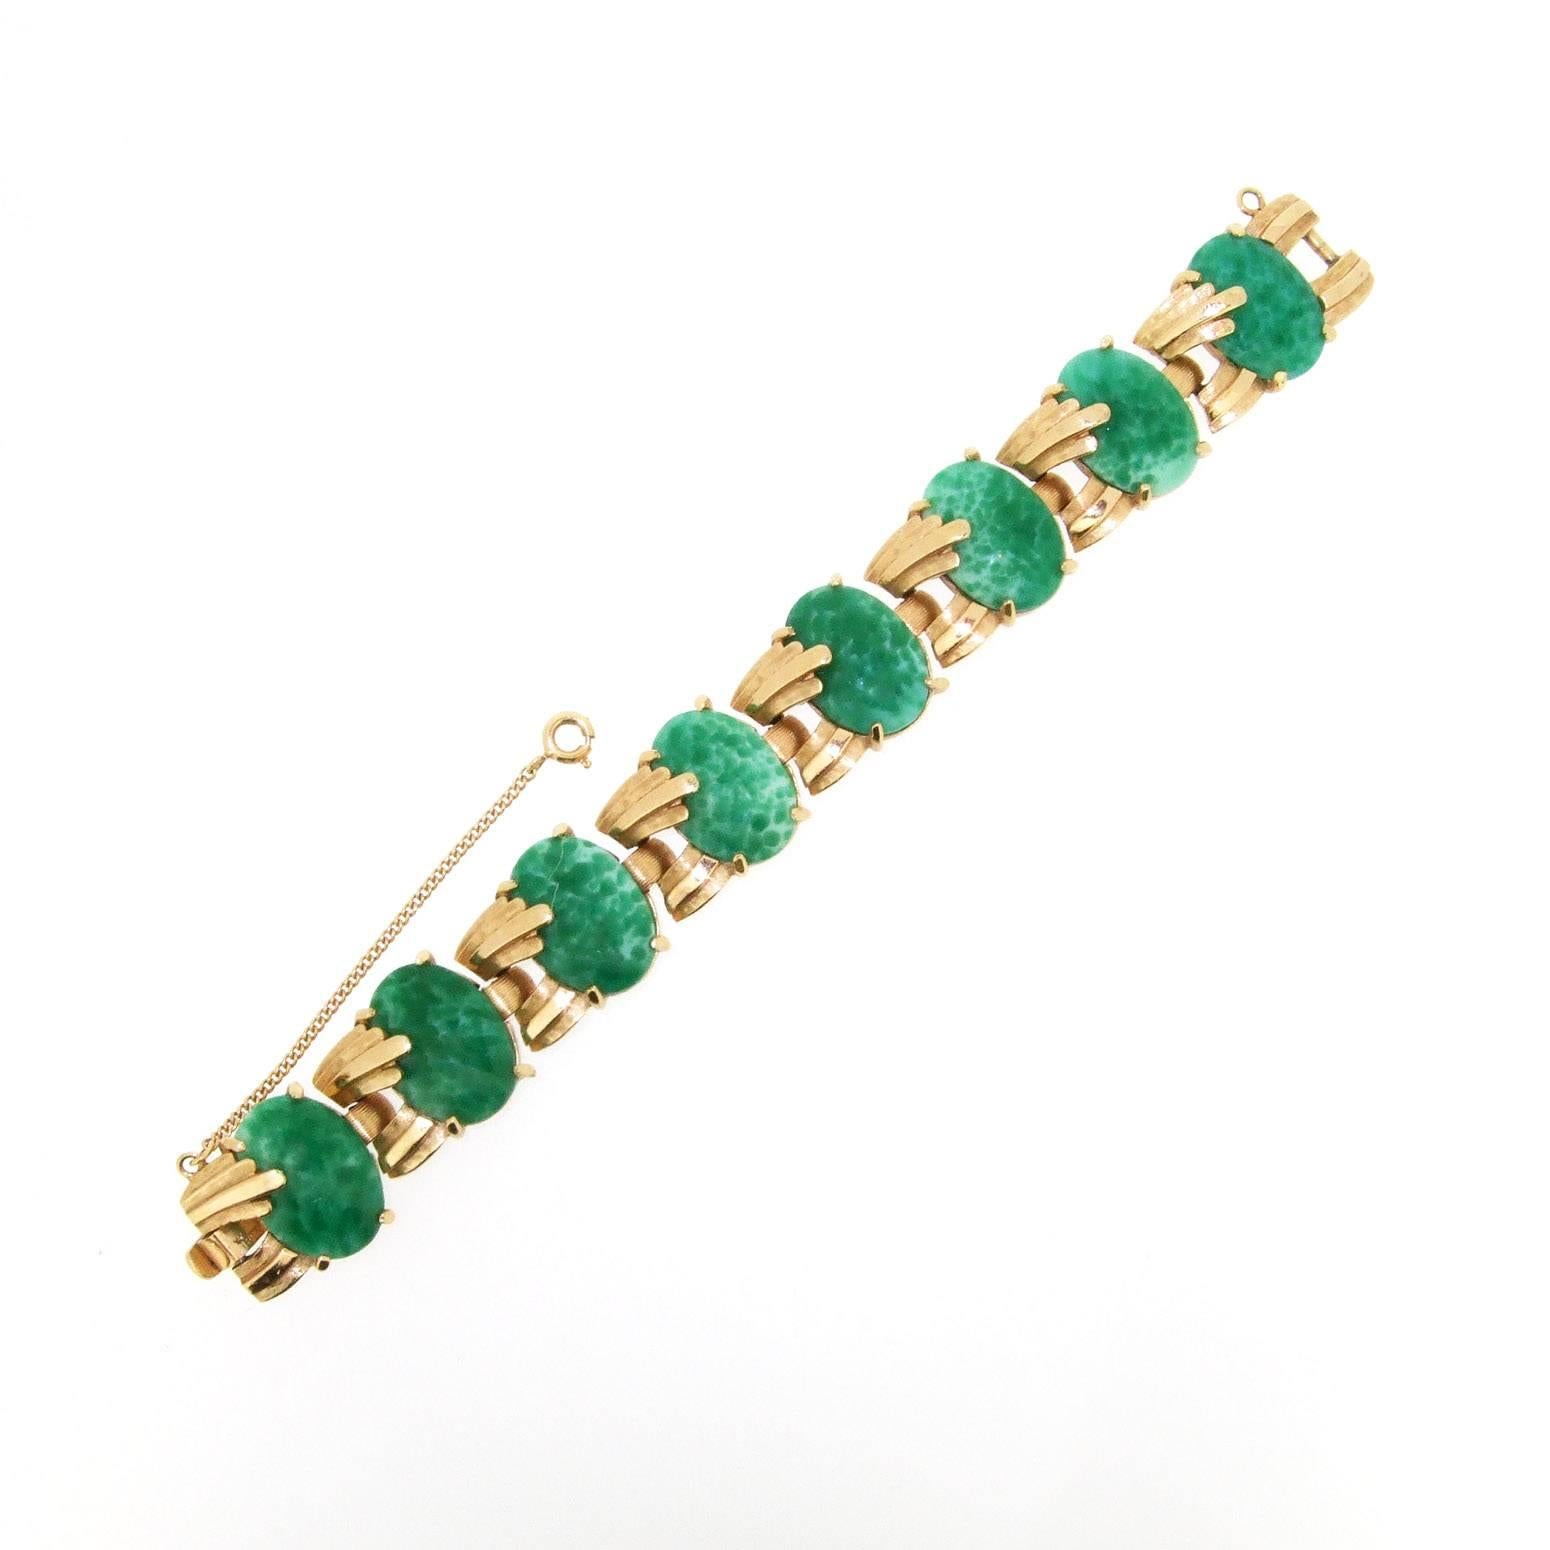 A beautiful vintage bracelet by Trifari USA from the 1960s in gold plated metal set with pretty green glass emulating jade. 

It measures 6 3/4 in length/ 16.5cm, by 1.8cm wide, by 0.6cm deep.

